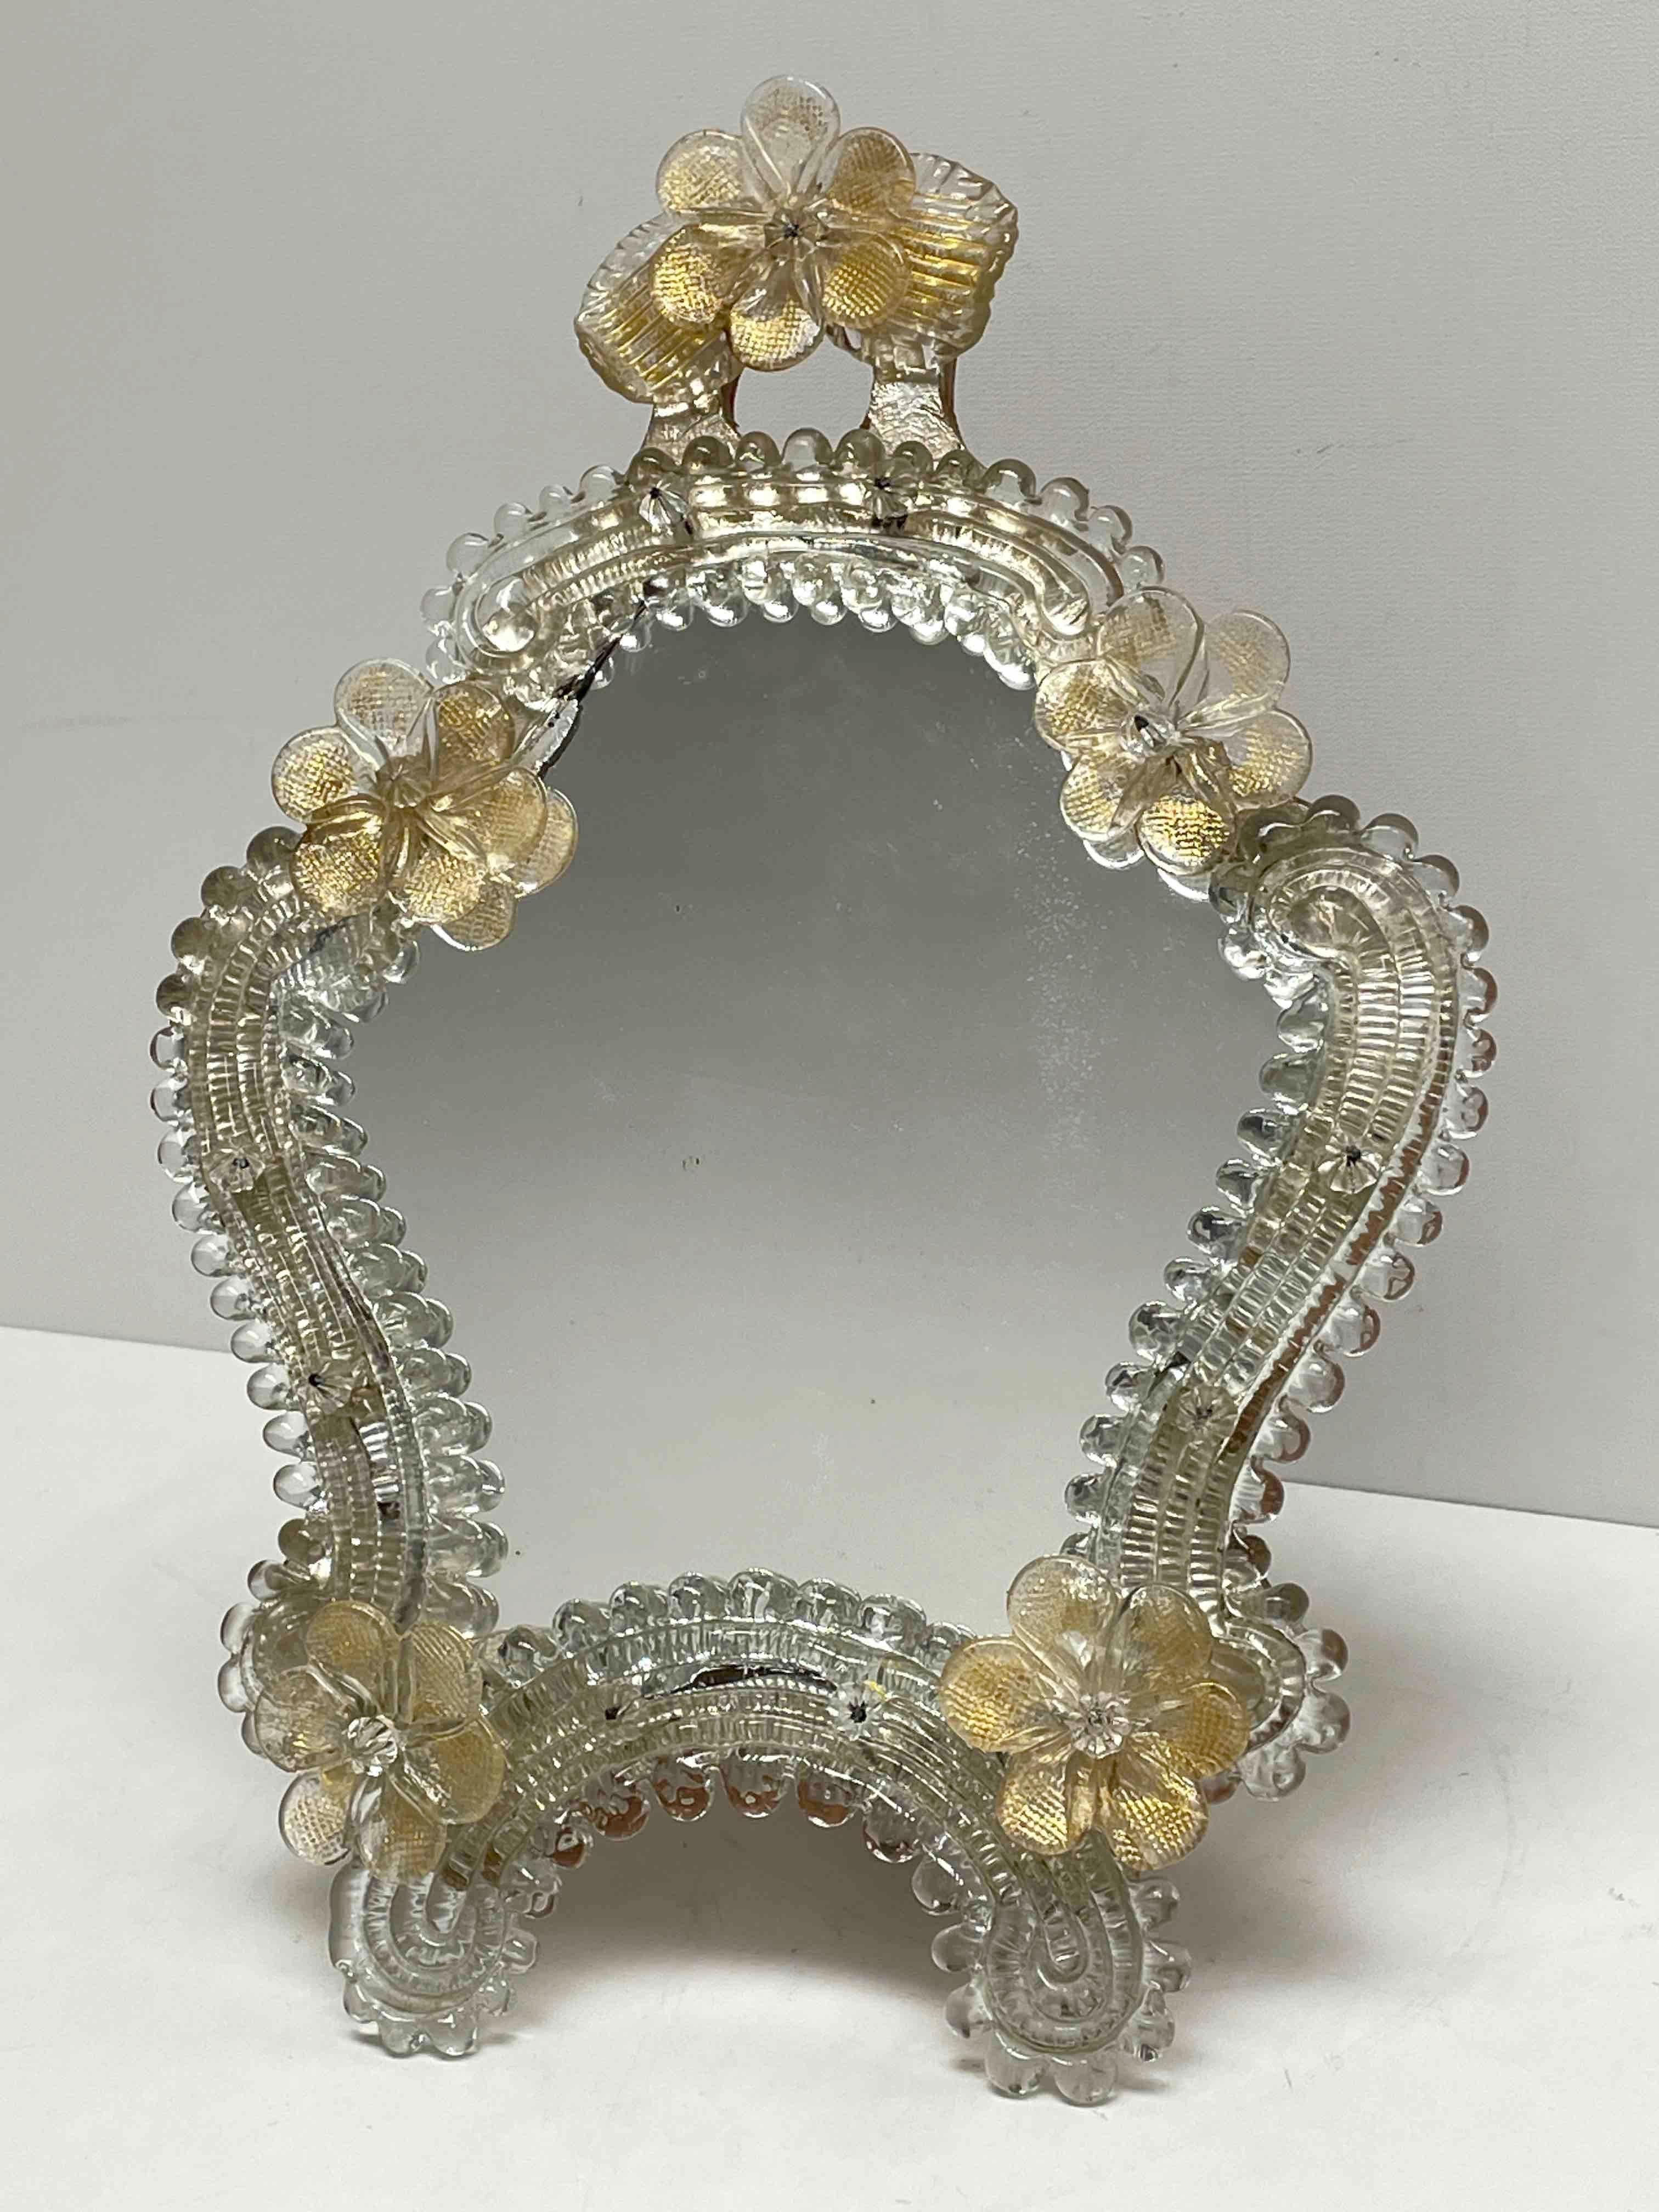 A gorgeous Murano glass vanity mirror surrounded with handmade clear gold flake flowers. Can be used as a wall mirror or standing mirror. With minor signs of wear as expected with age and use. A nice addition to any girls or ladies room. Its stands